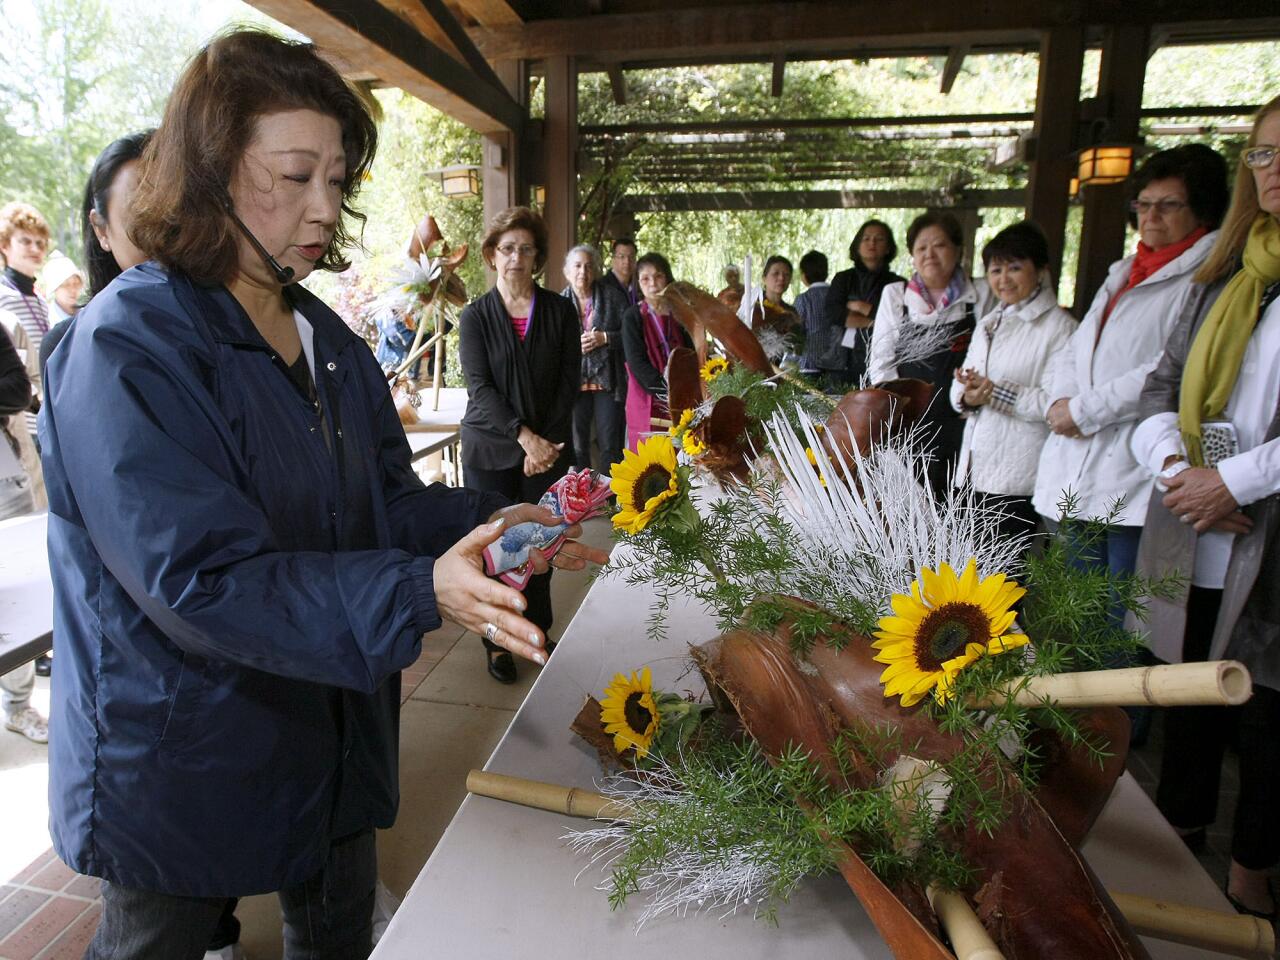 Iemoto (Head Master) Akane Teshigahara gives critique of an Ikebana (Japanese flower arrangement) on the last day of Sogetsu School's North American International Flower Arranging and Performance Seminar at Descanso Gardens in La Canada Flintridge on Tuesday, April 30, 2013. Dozens of conference participants from around the world gathered at Descanso Gardens for the quadrennial event.